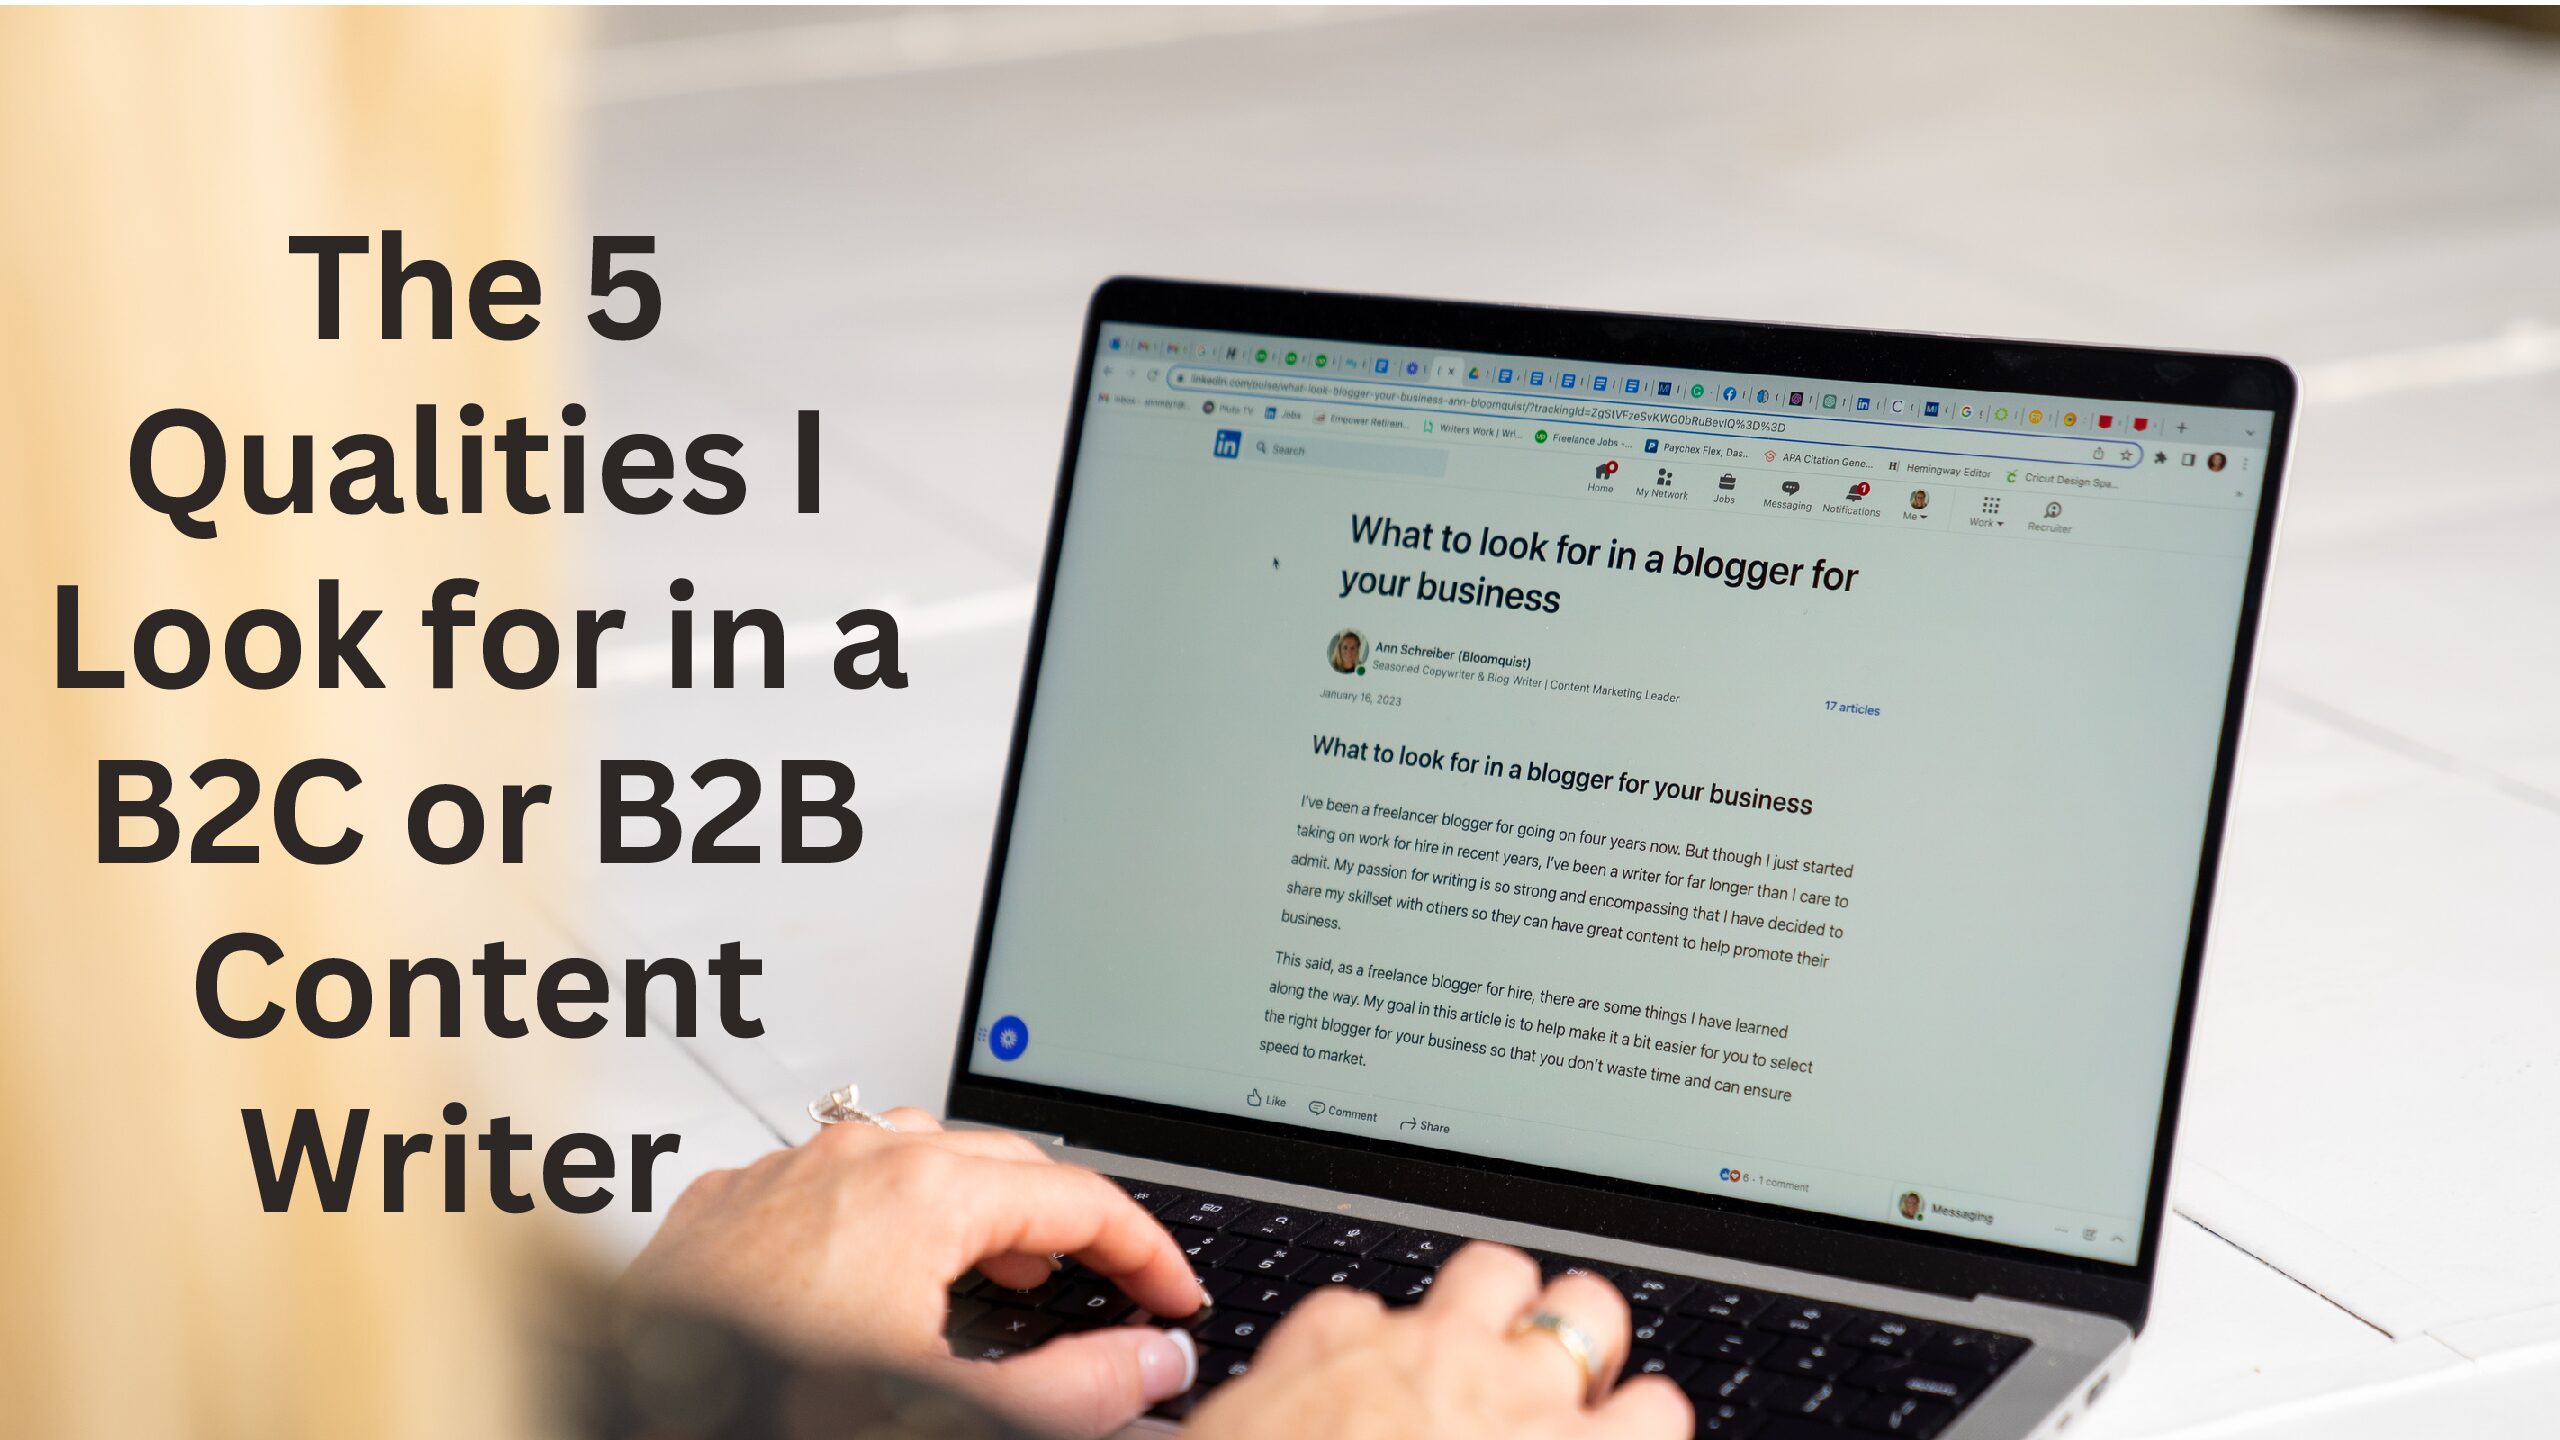 The 5 Qualities I Look for in a B2C or B2B Content Writer 